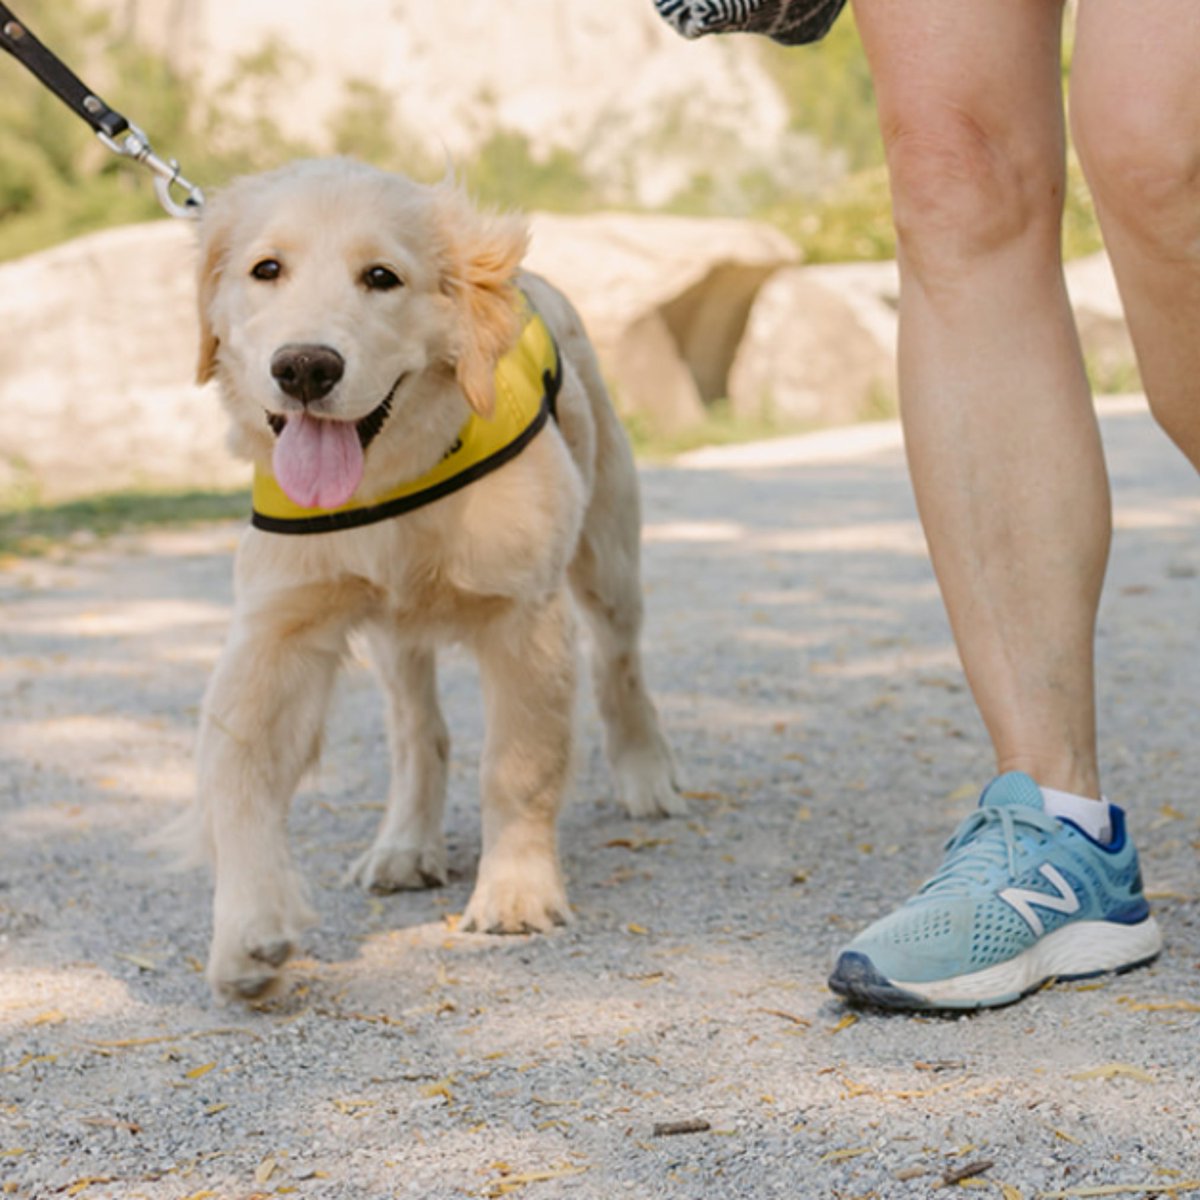 Still one week left to participate in 2024 Pup Crawl, our virtual 5k race in support of CNIB Guide Dogs! Sign up today to help change the lives of people who are blind — and your fundraising efforts will be MATCHED up to $50,000 by Mary and John Crocker! cnib.ca/pupcrawl